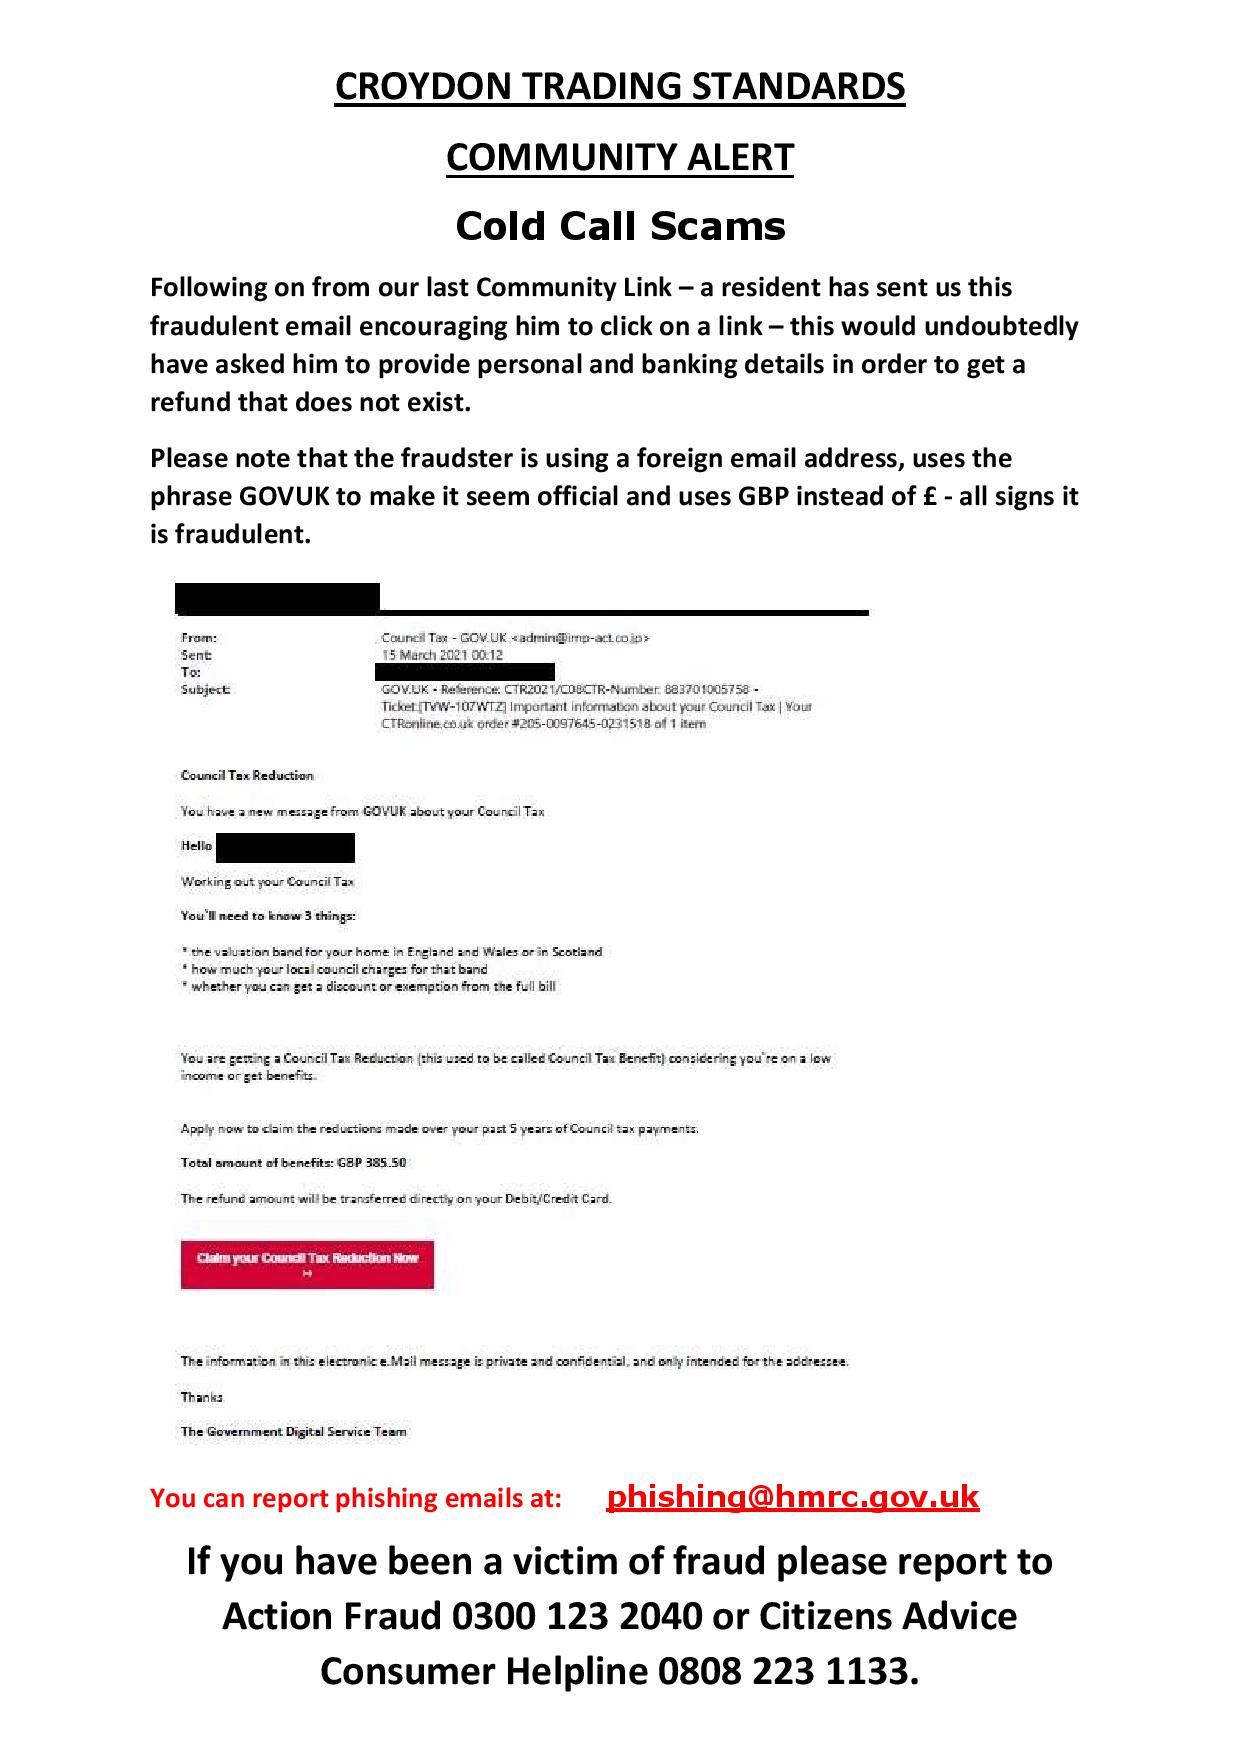 SCAM Emails Now Offering A Council Tax Rebate Croydon Conservatives